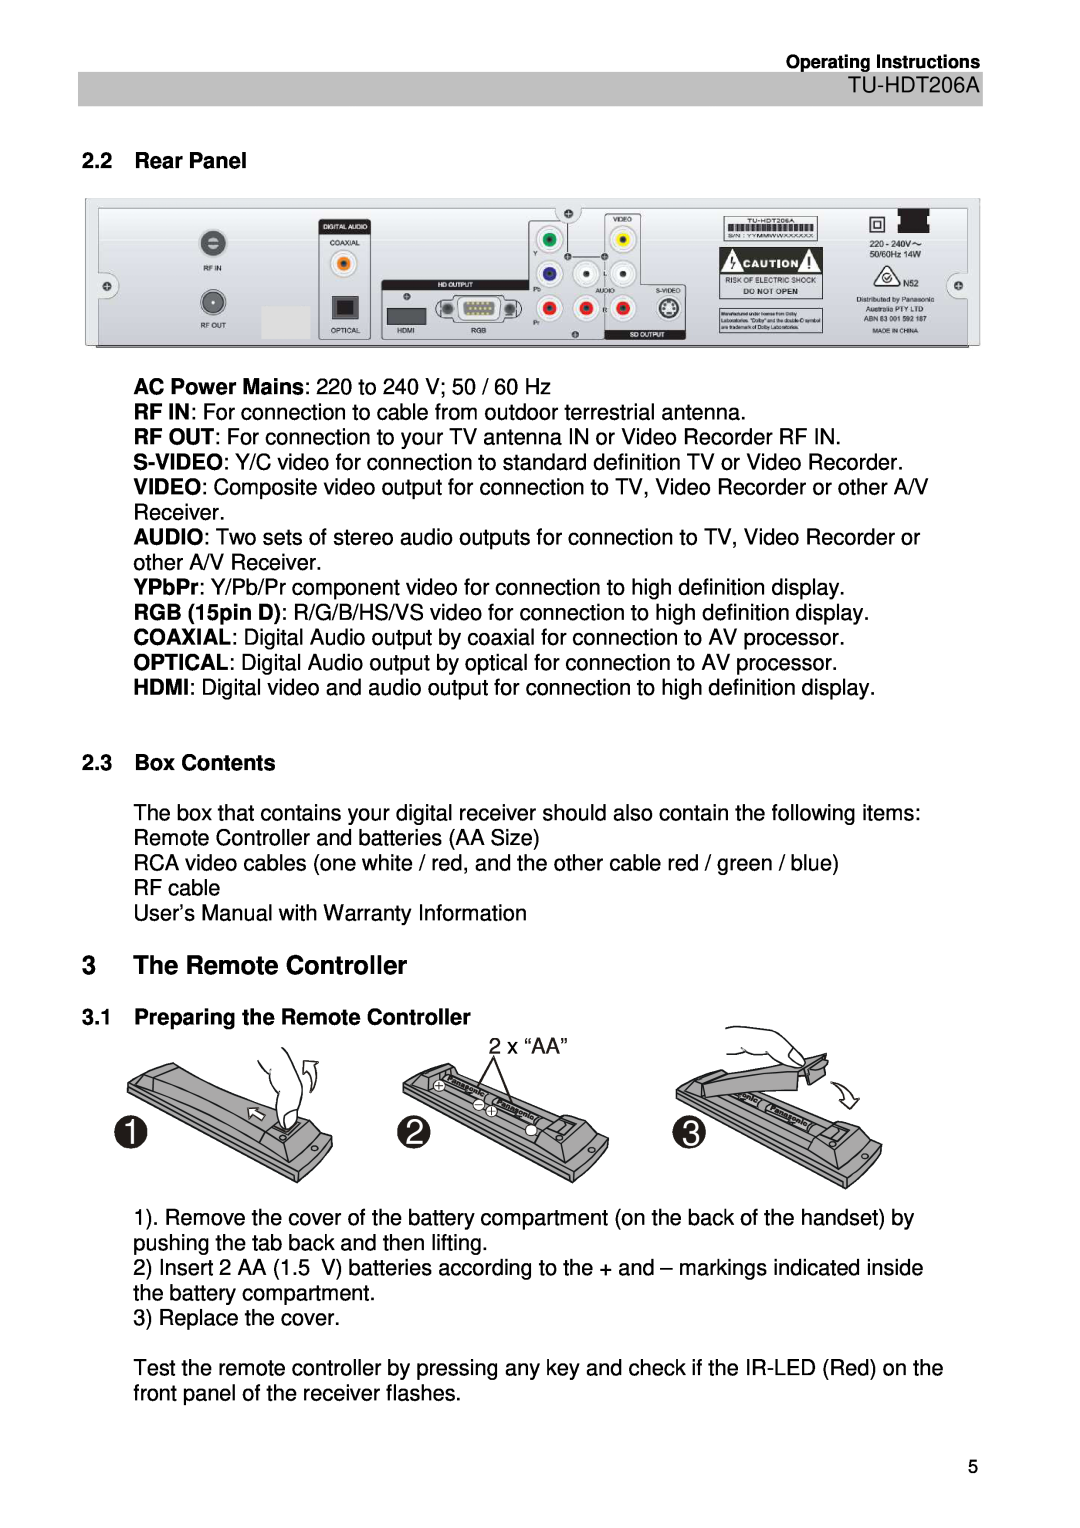 Panasonic TU-HDT206A The Remote Controller, 2.2Rear Panel, 2.3Box Contents, 3.1Preparing the Remote Controller, 2 x “AA” 